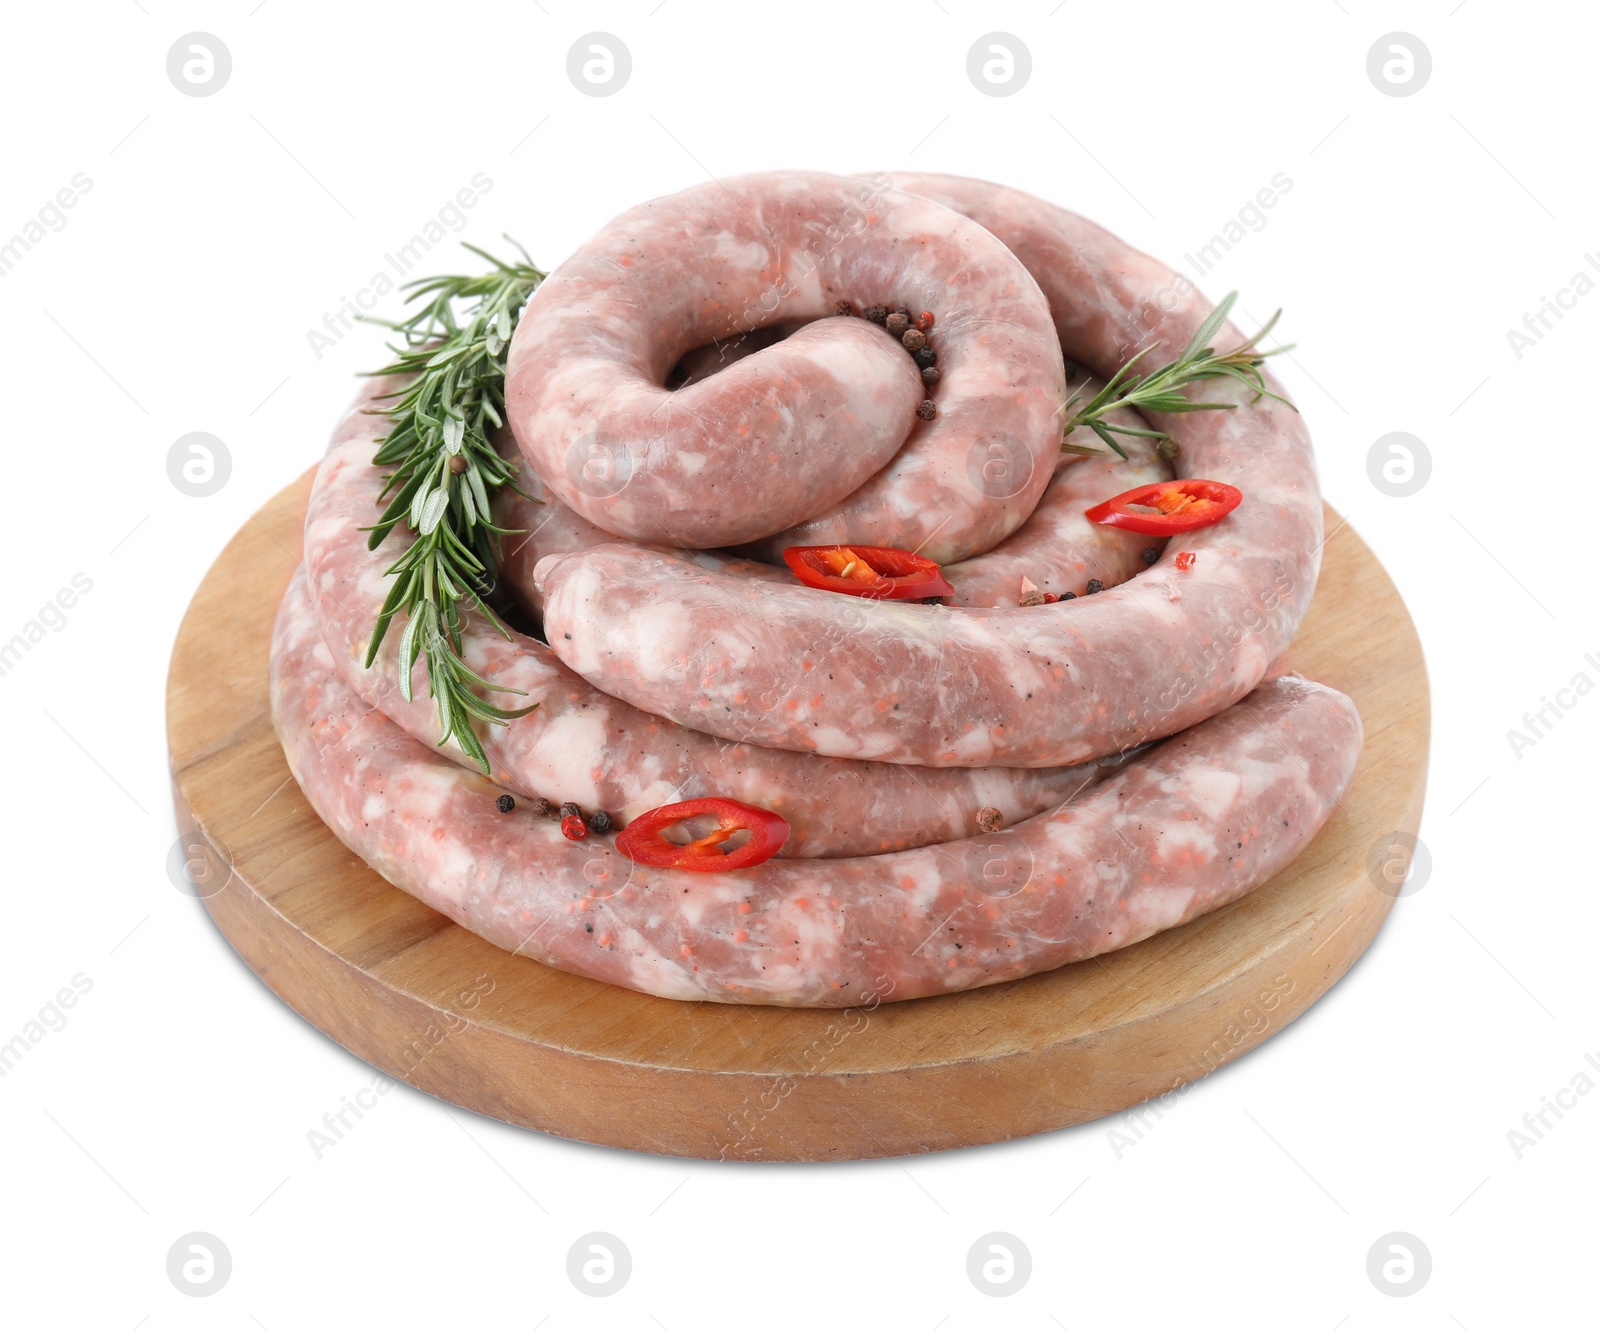 Photo of Board with homemade sausages, chili, rosemary and peppercorns isolated on white